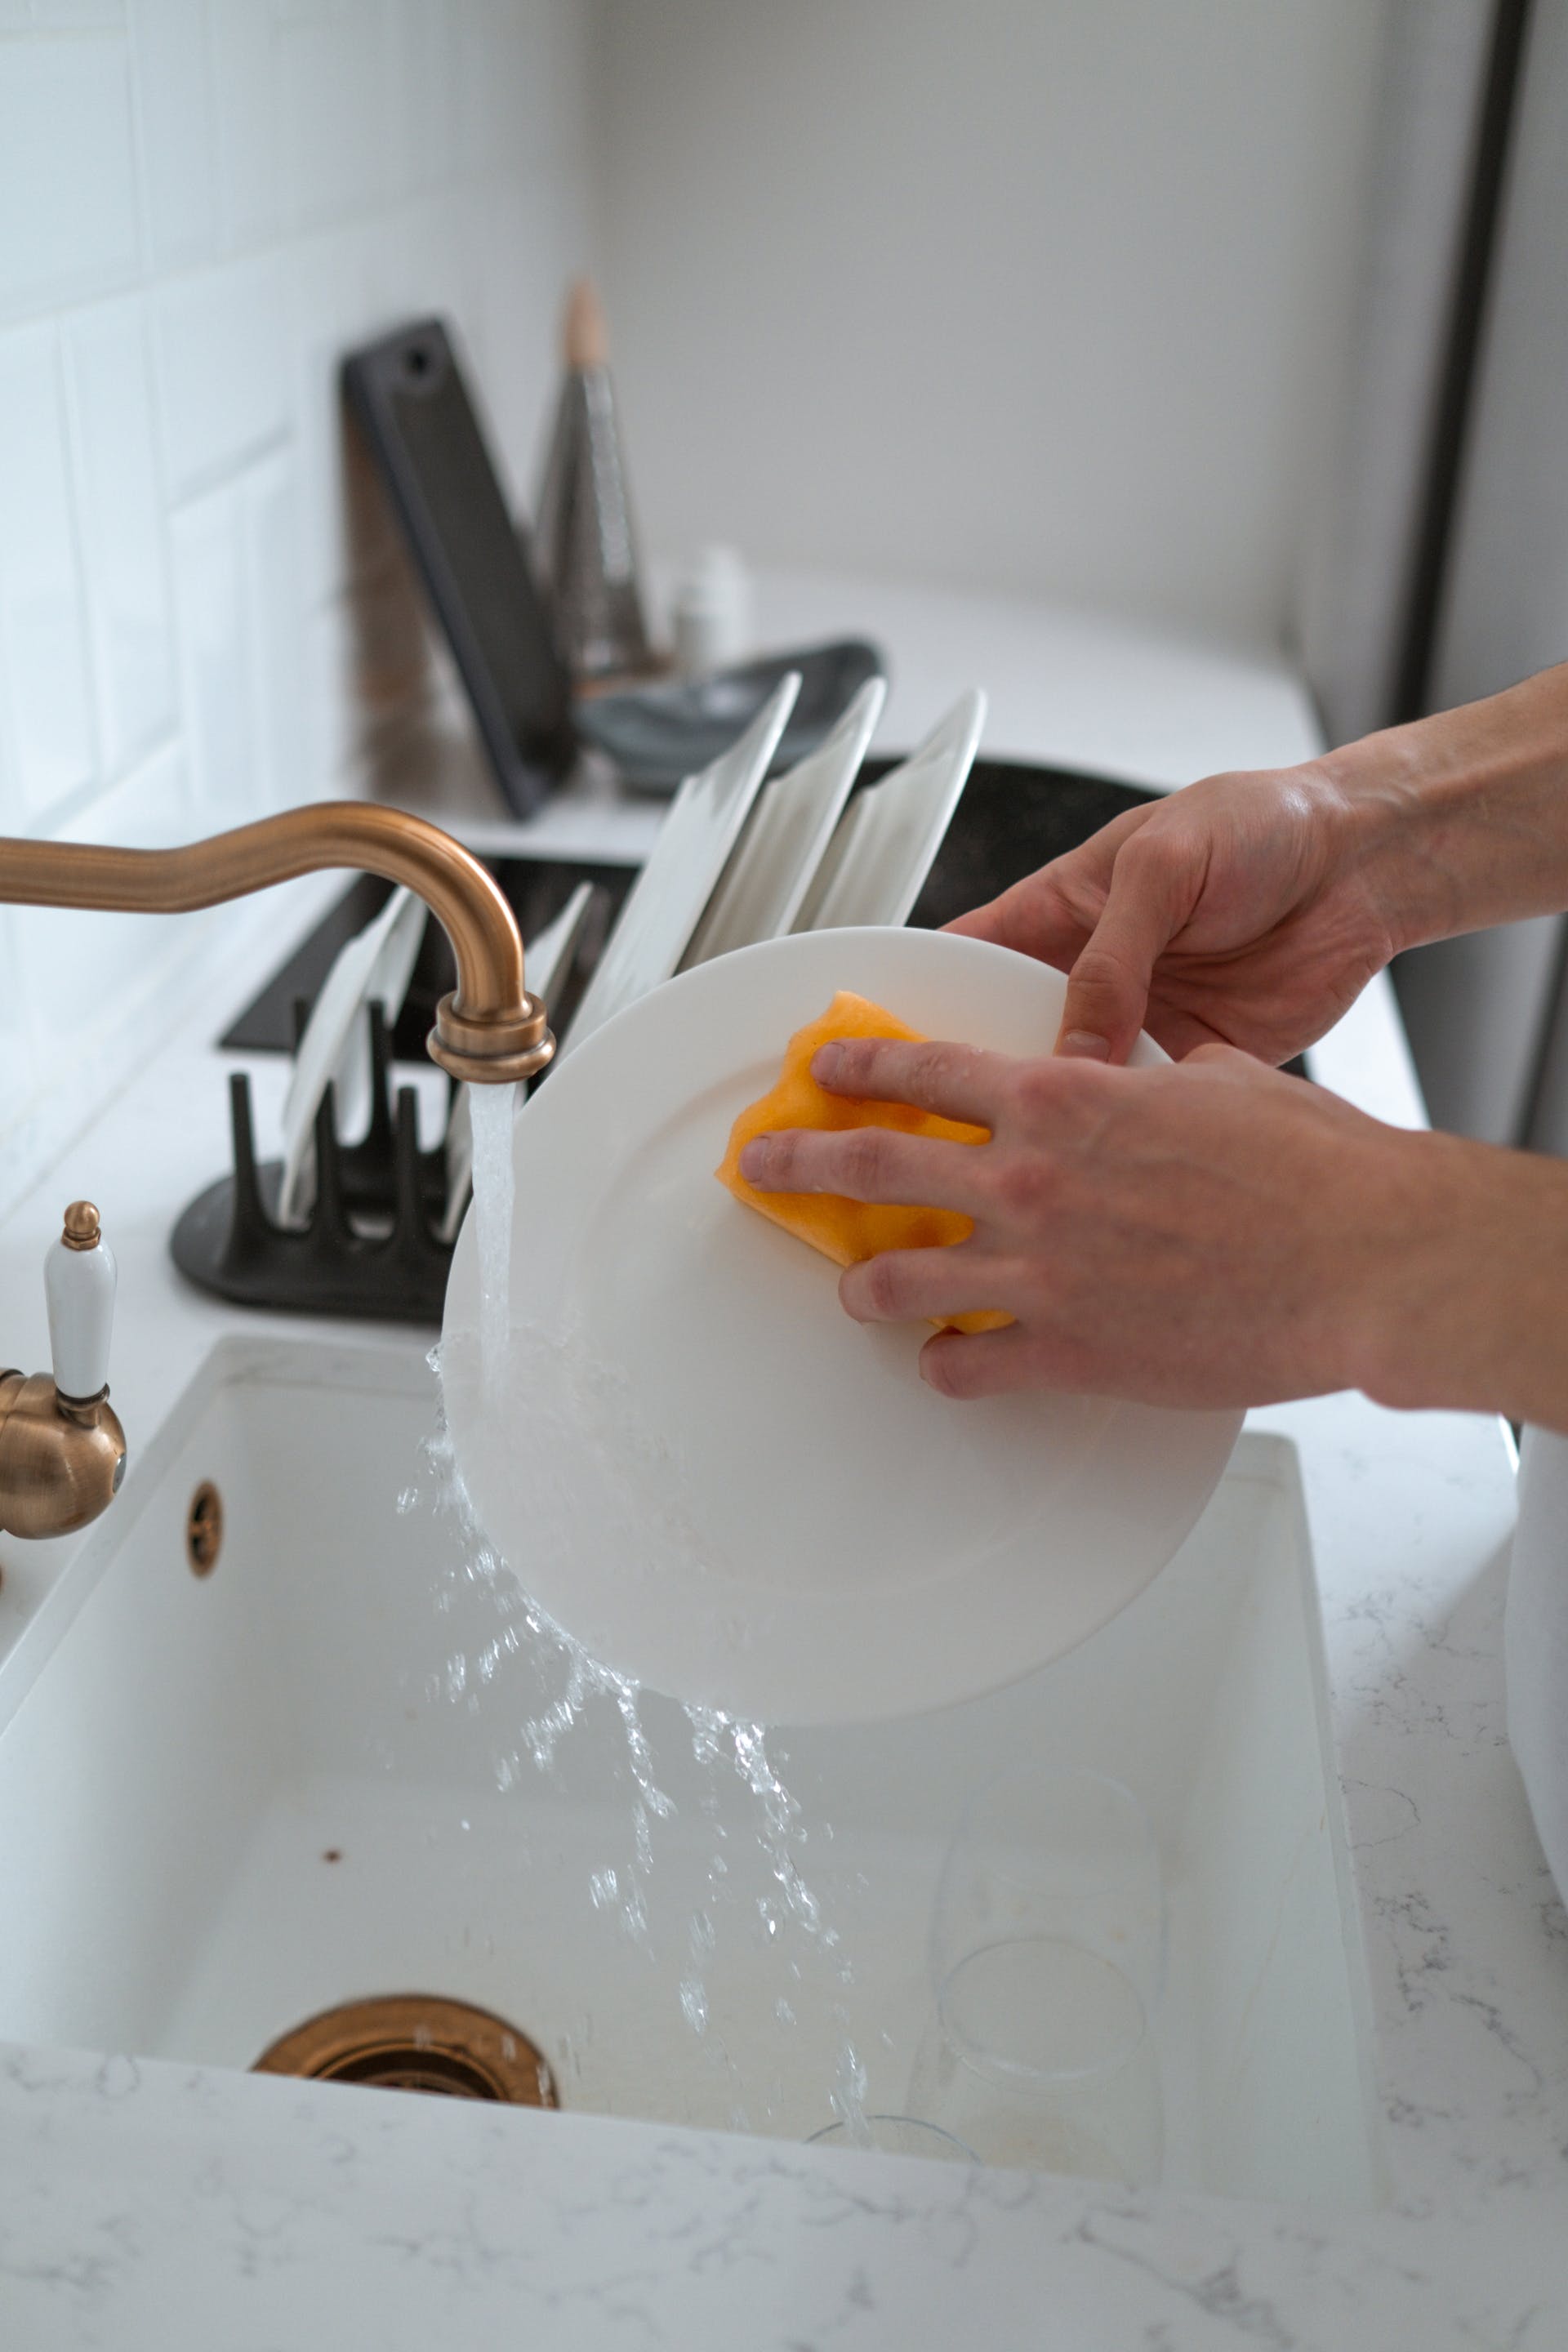 Person washing dishes | Source: Pexels